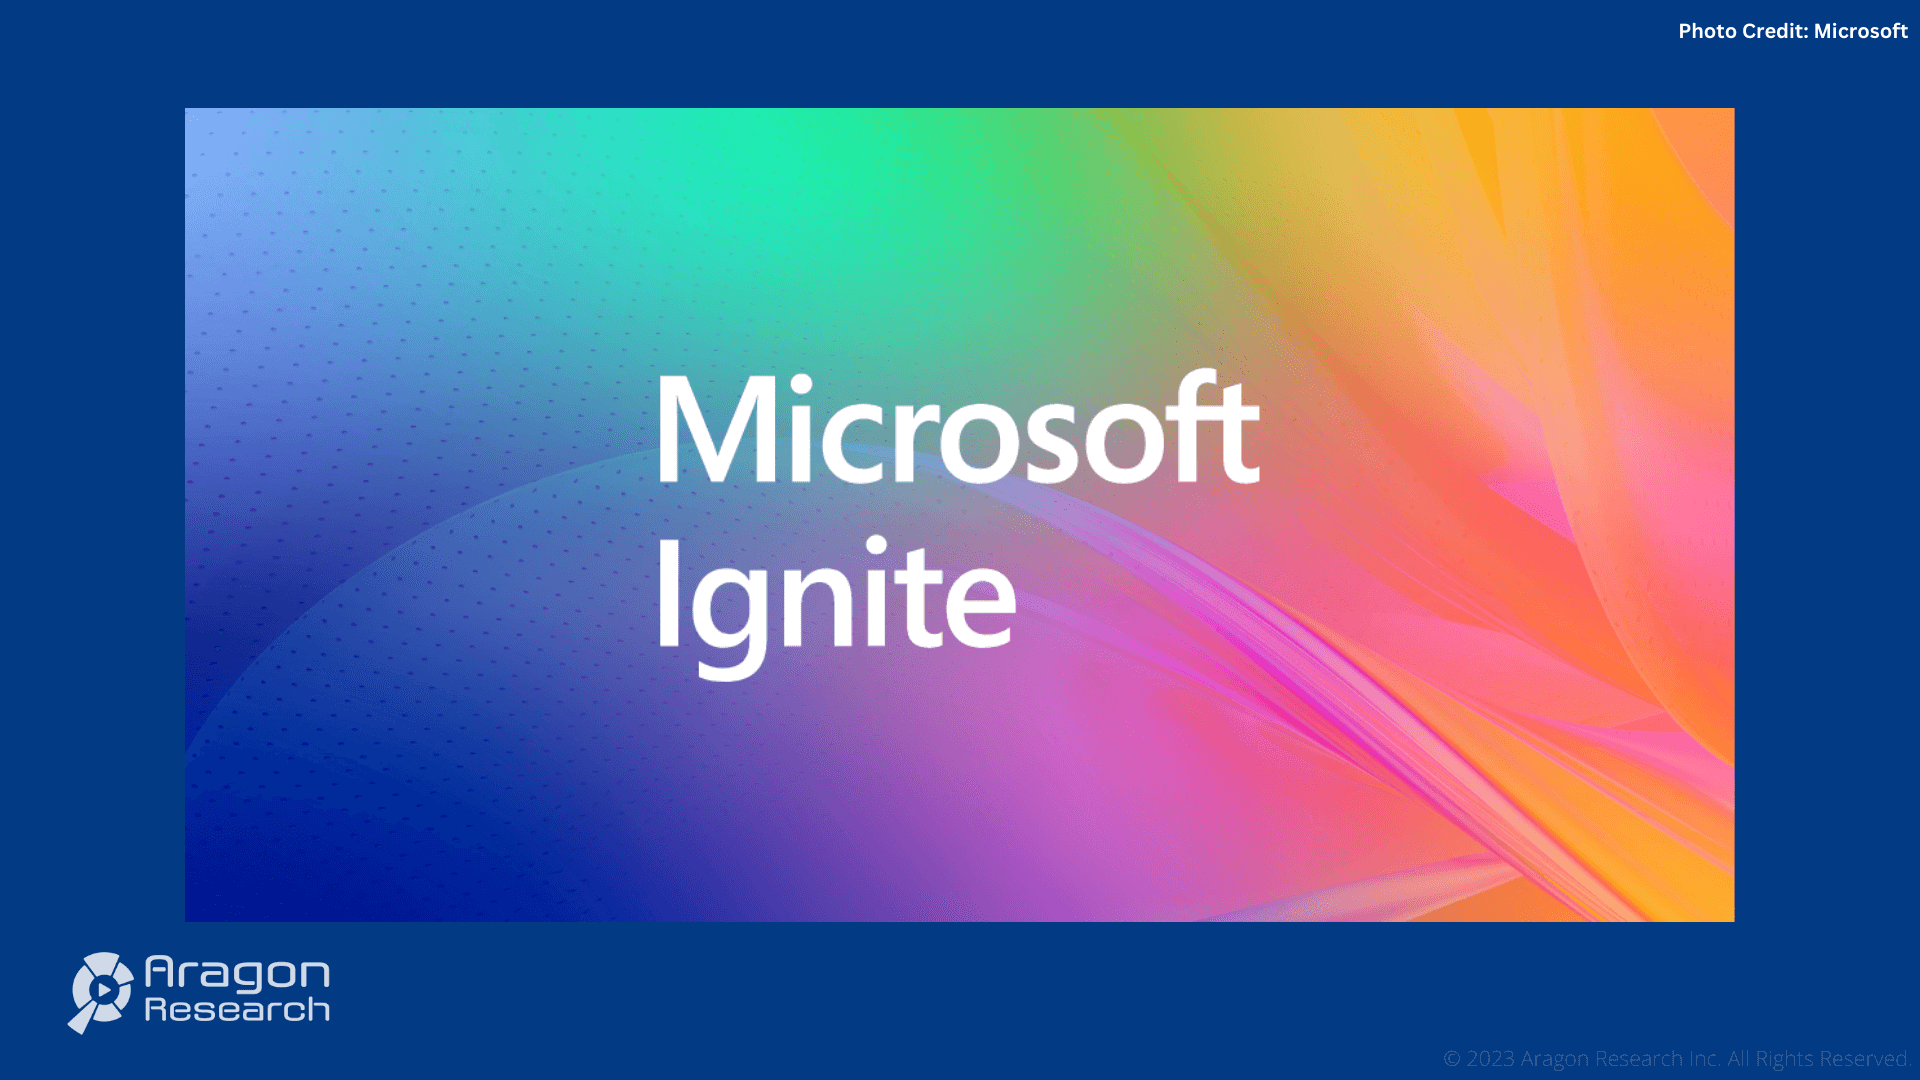 Microsoft CoPilot | The Secret They Didn't Reveal at Ignite